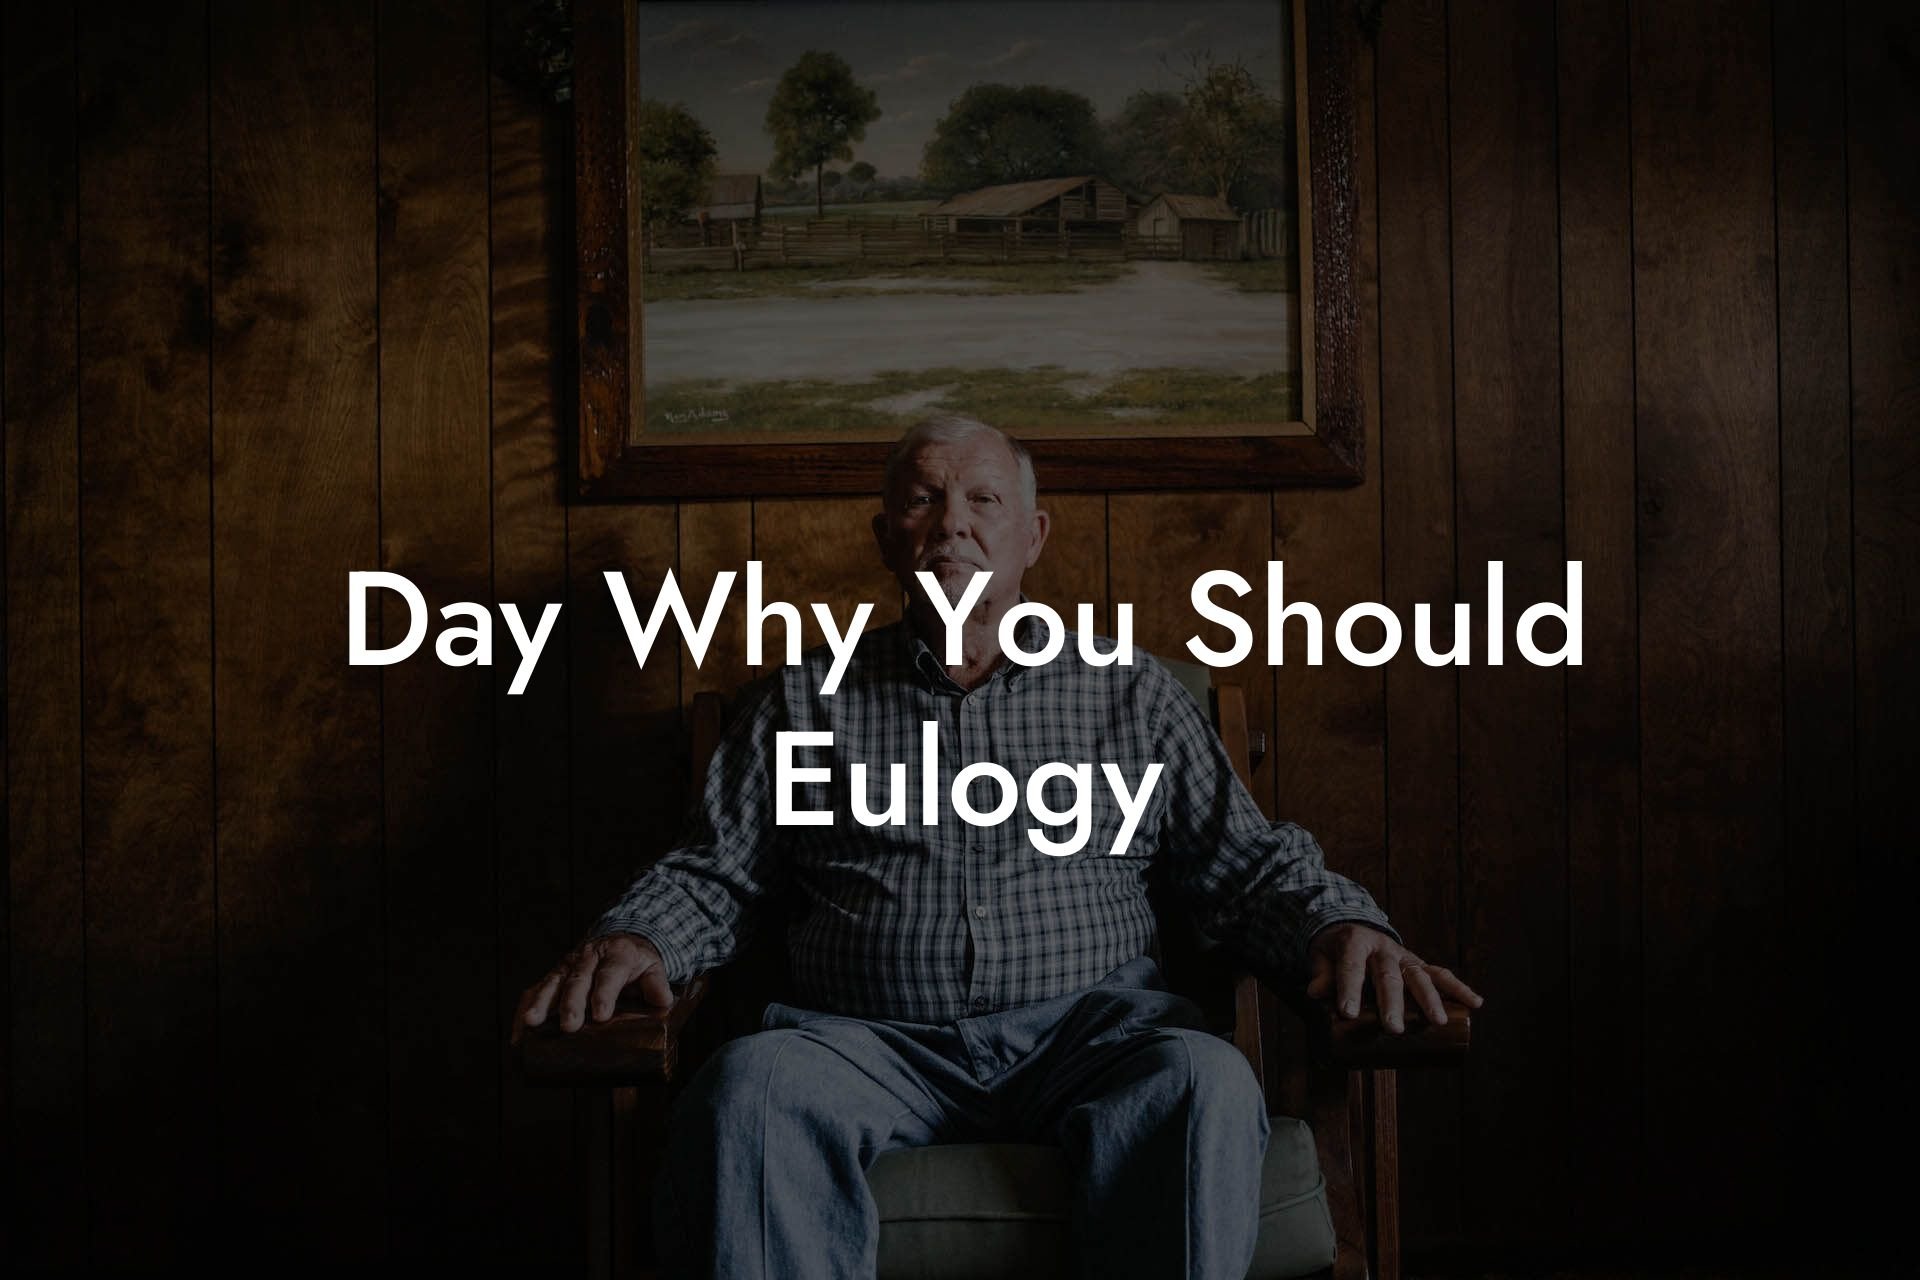 Day Why You Should Eulogy